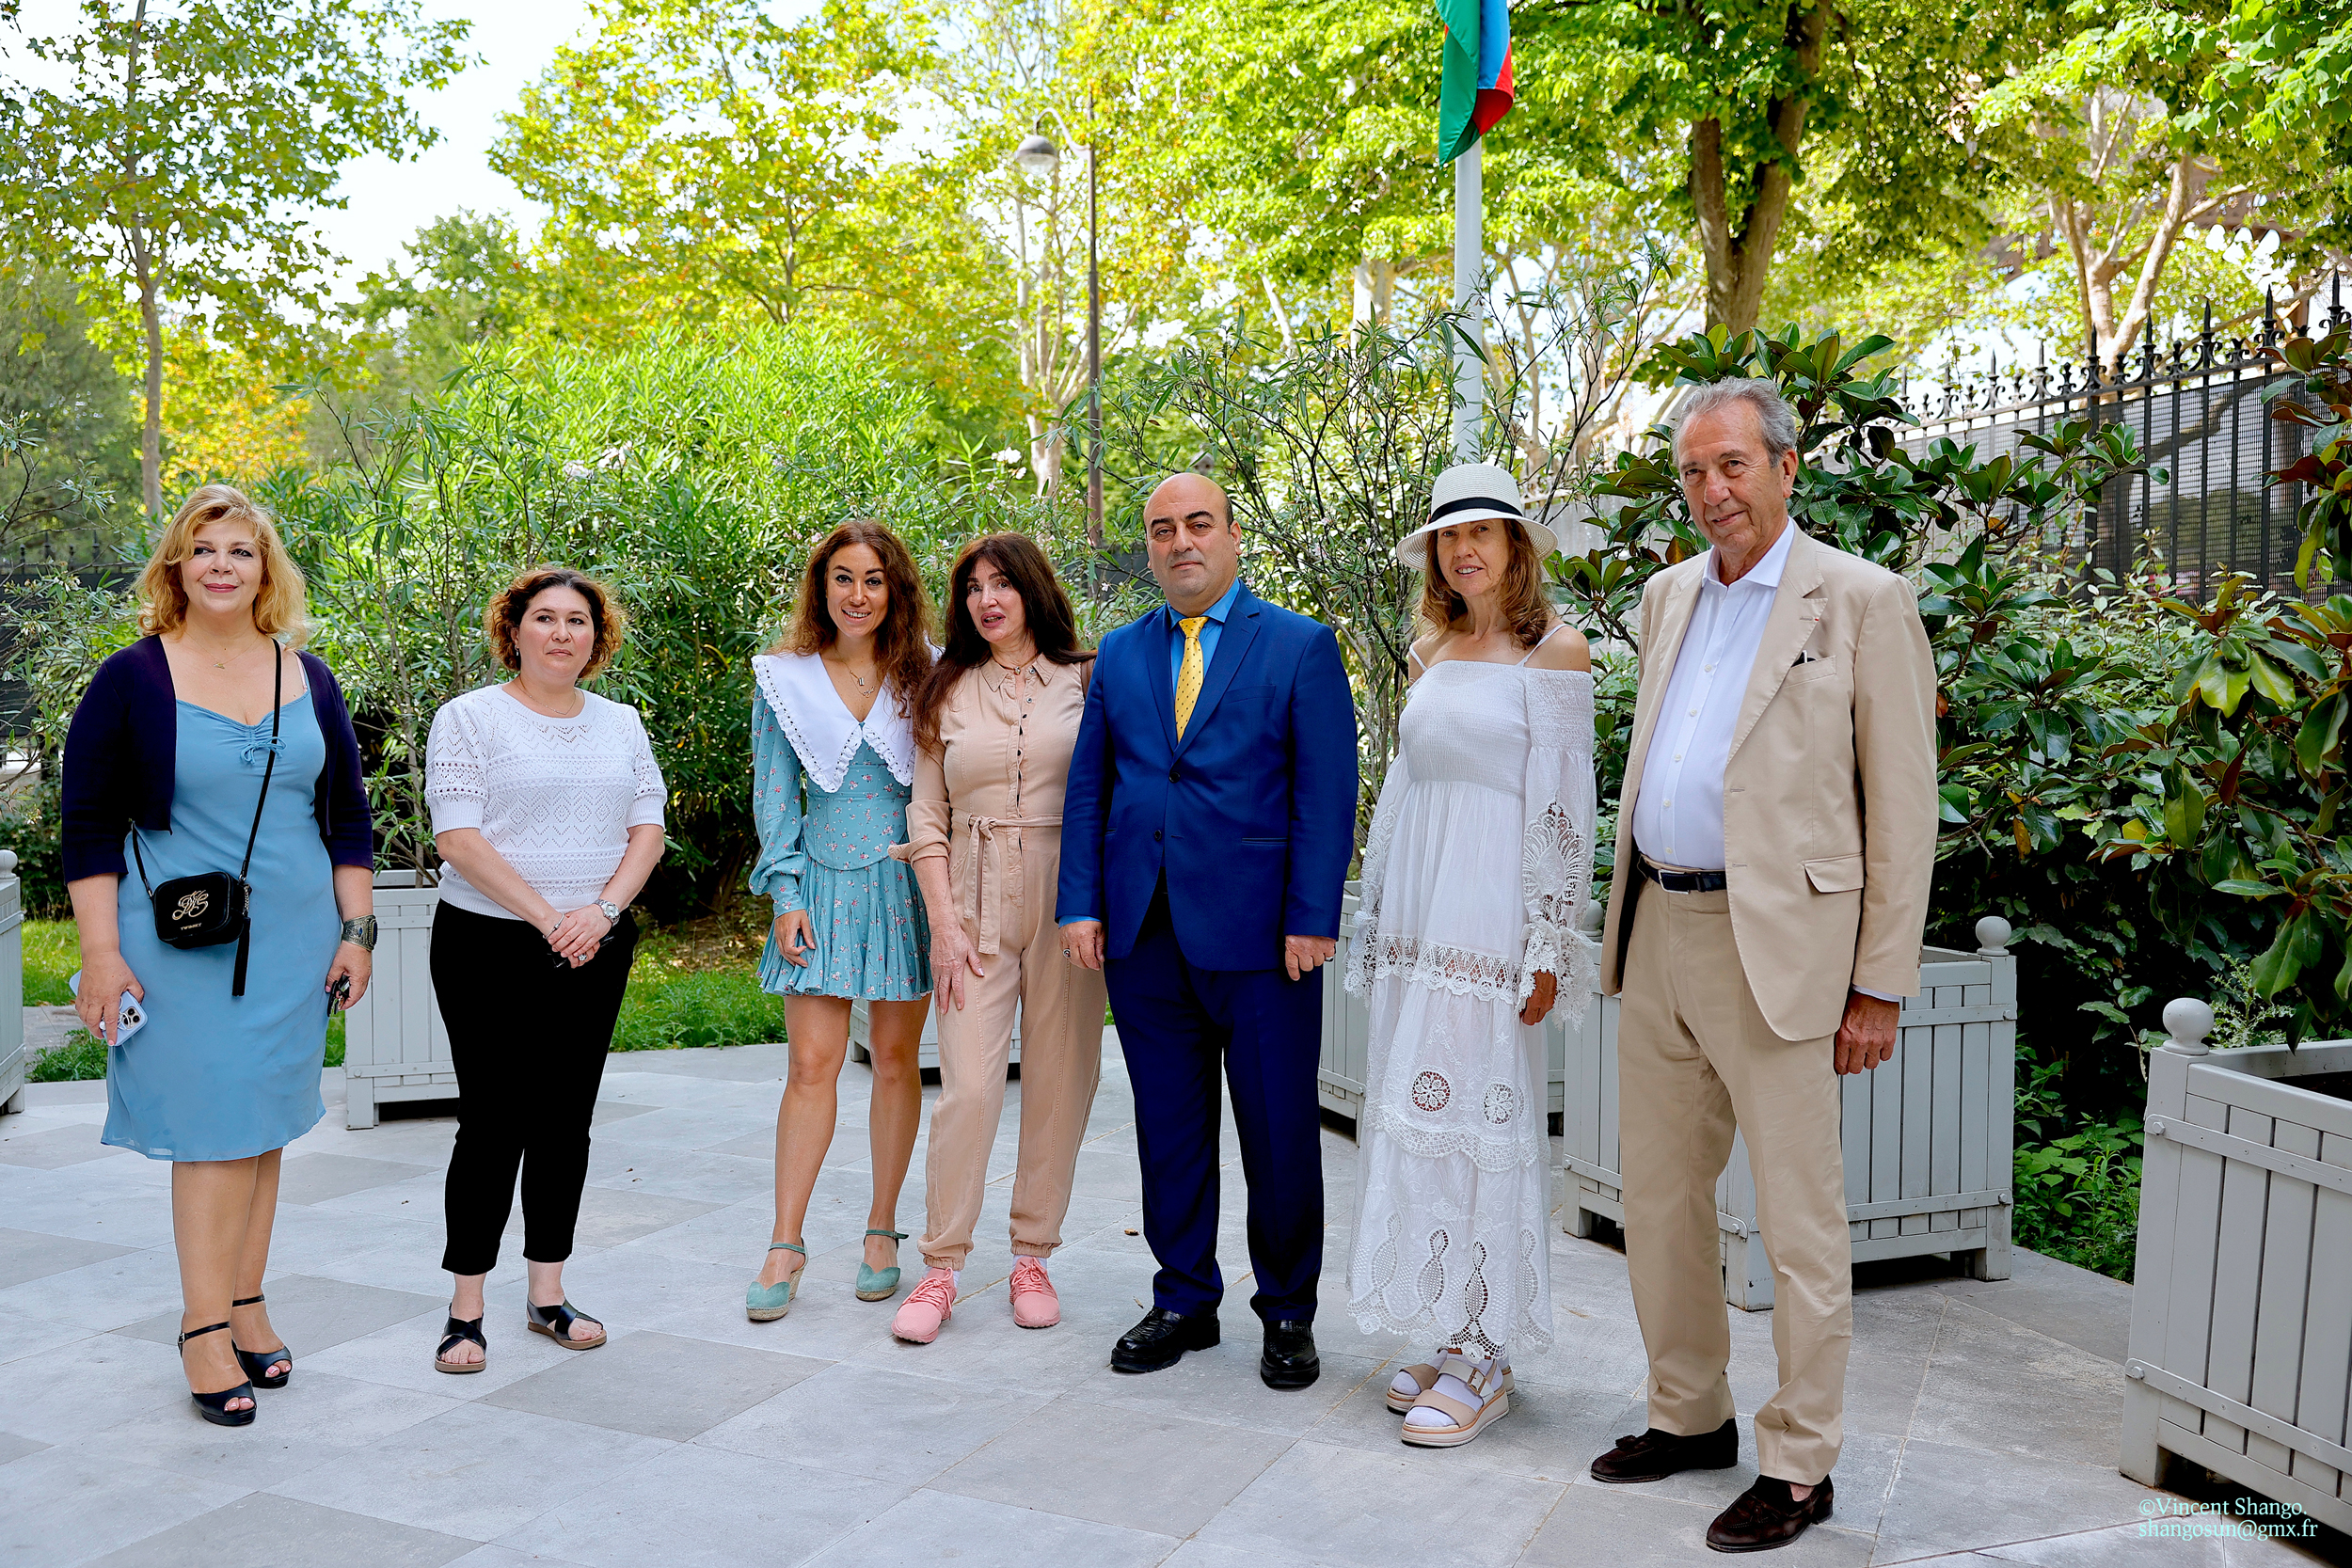 100 Moments of Heydar Aliyev's - Life book - Emin Nasirli is the author and editor of Mon Azerbaïdjan Magazine - Special Guest